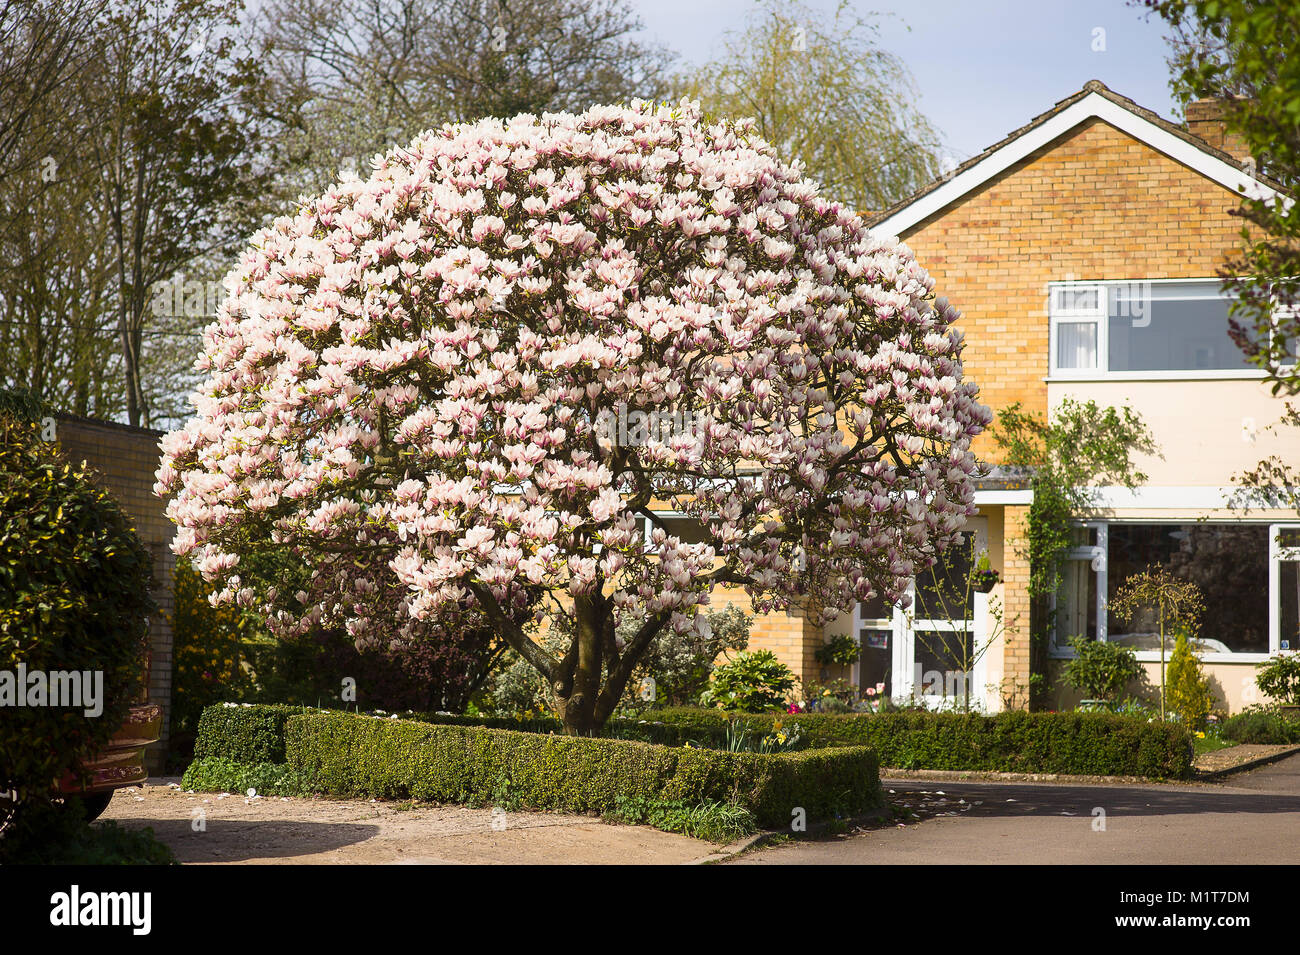 A magnificent magnolia tree shaped and in full bloom in a small front garden in a Wiltshire village in UK Stock Photo